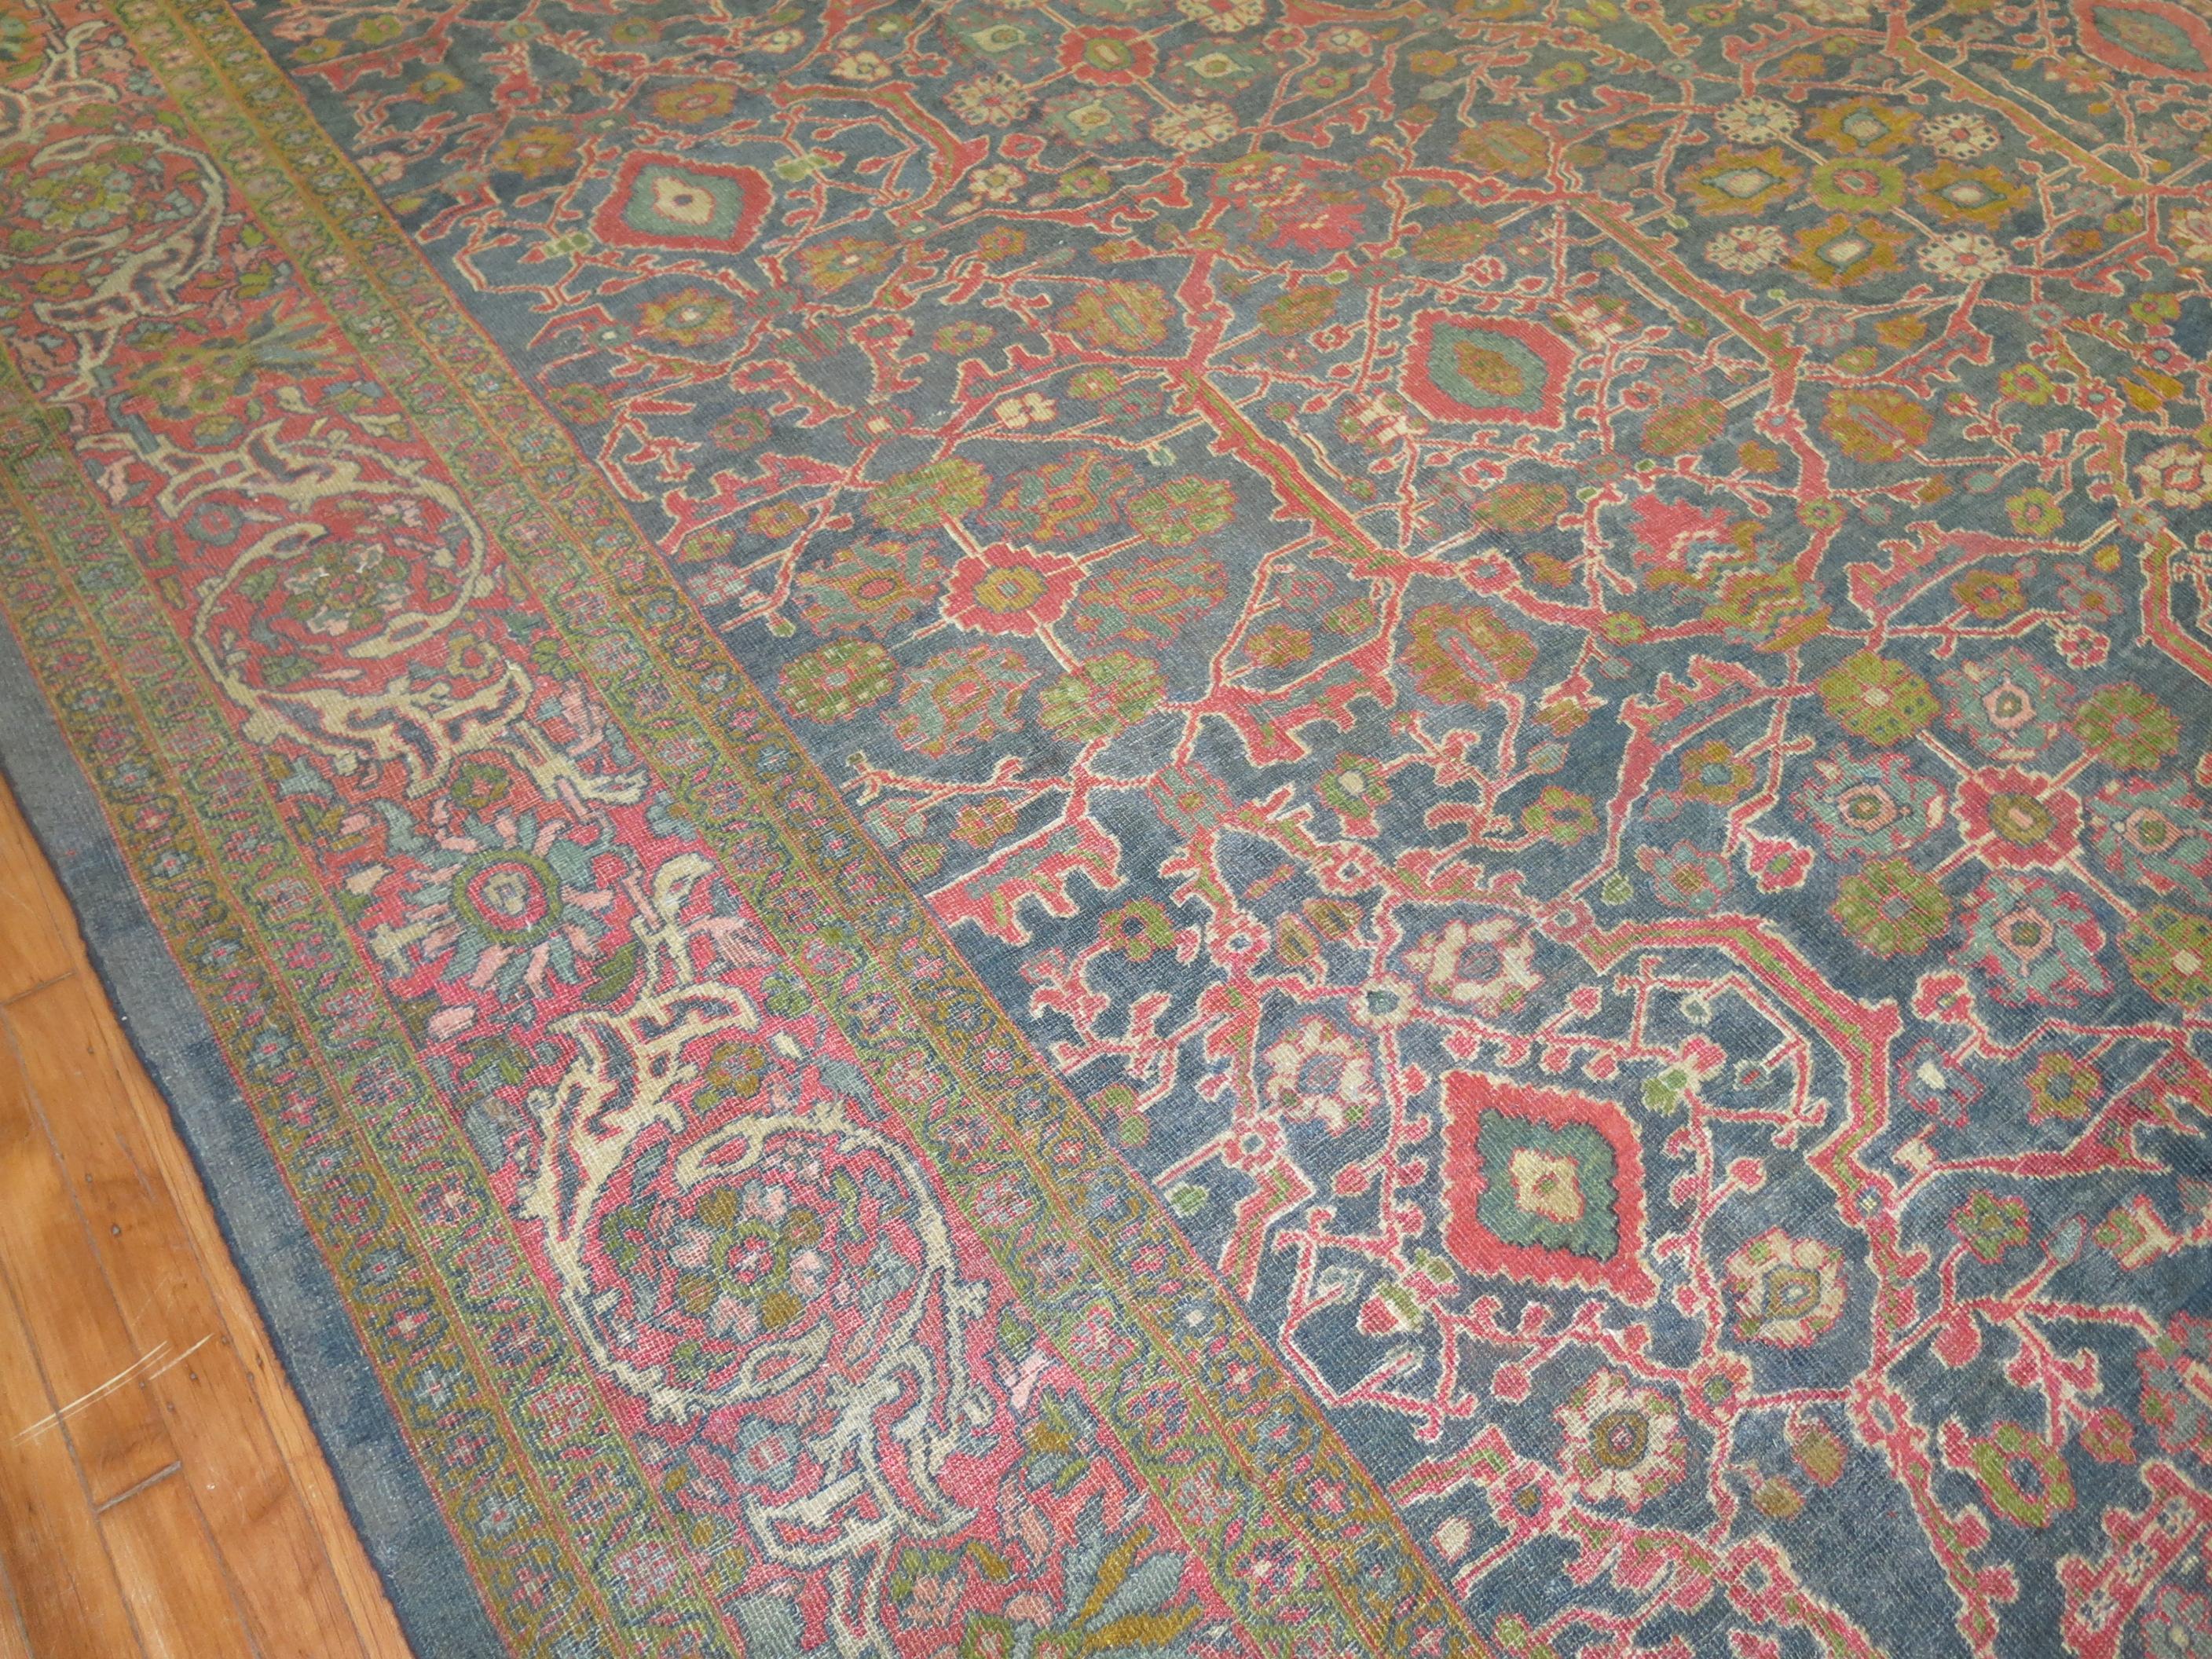 Large size early 20th century antique Persian Mahal rug with an all-over large scale geometric design a gray blue fieldpink border. Dominant accents in green, brown and pink

Measures: 13'1” x 17'5